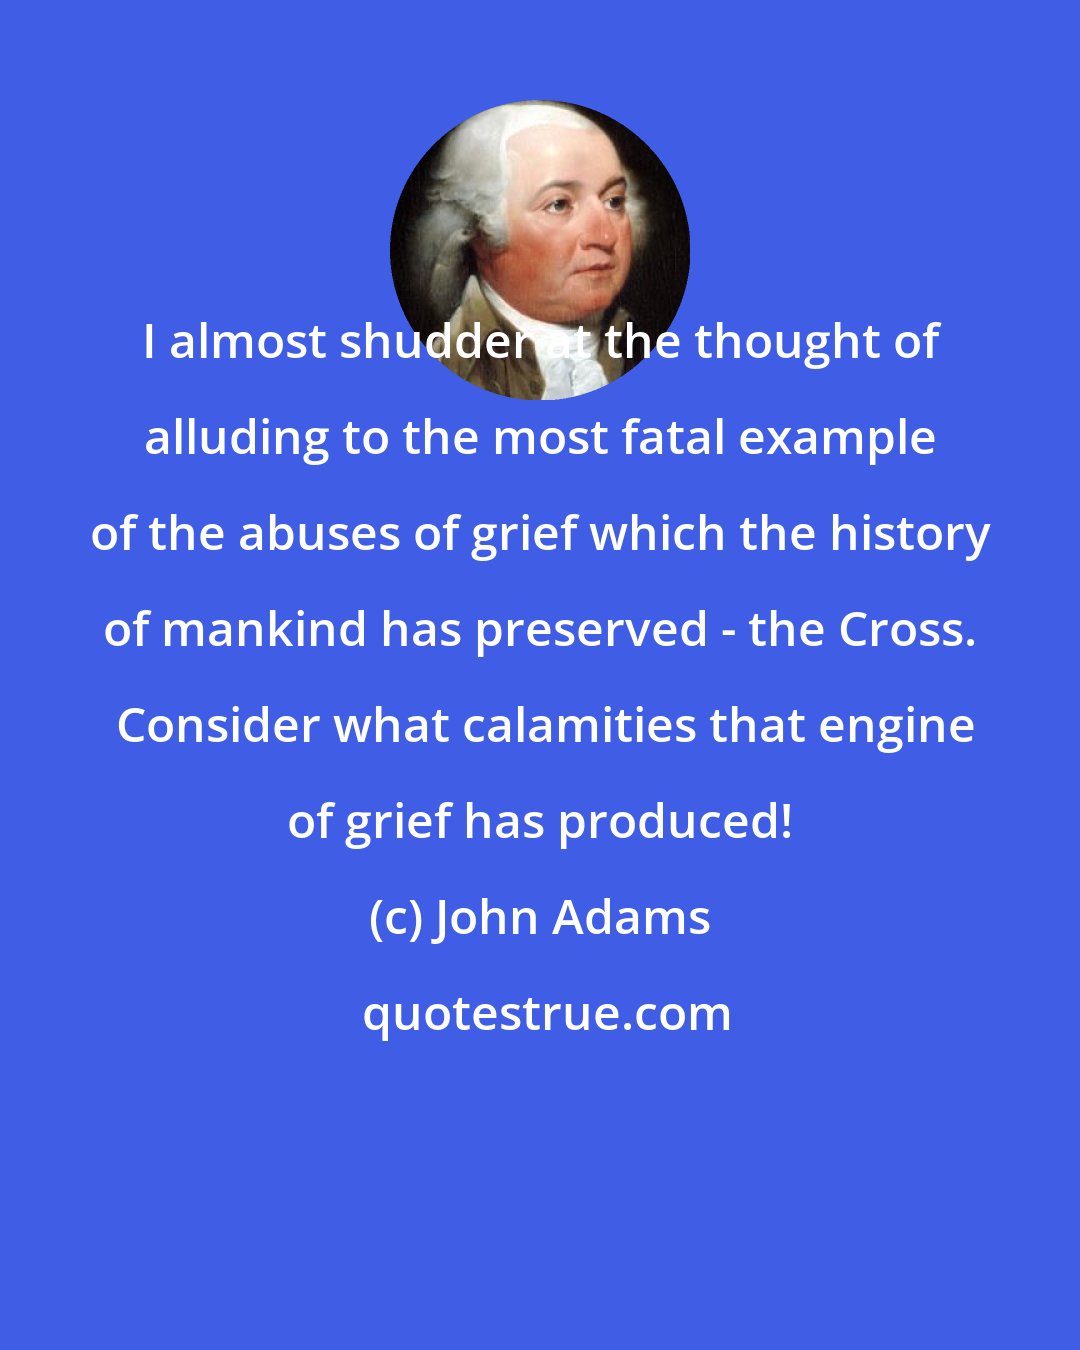 John Adams: I almost shudder at the thought of alluding to the most fatal example of the abuses of grief which the history of mankind has preserved - the Cross.  Consider what calamities that engine of grief has produced!